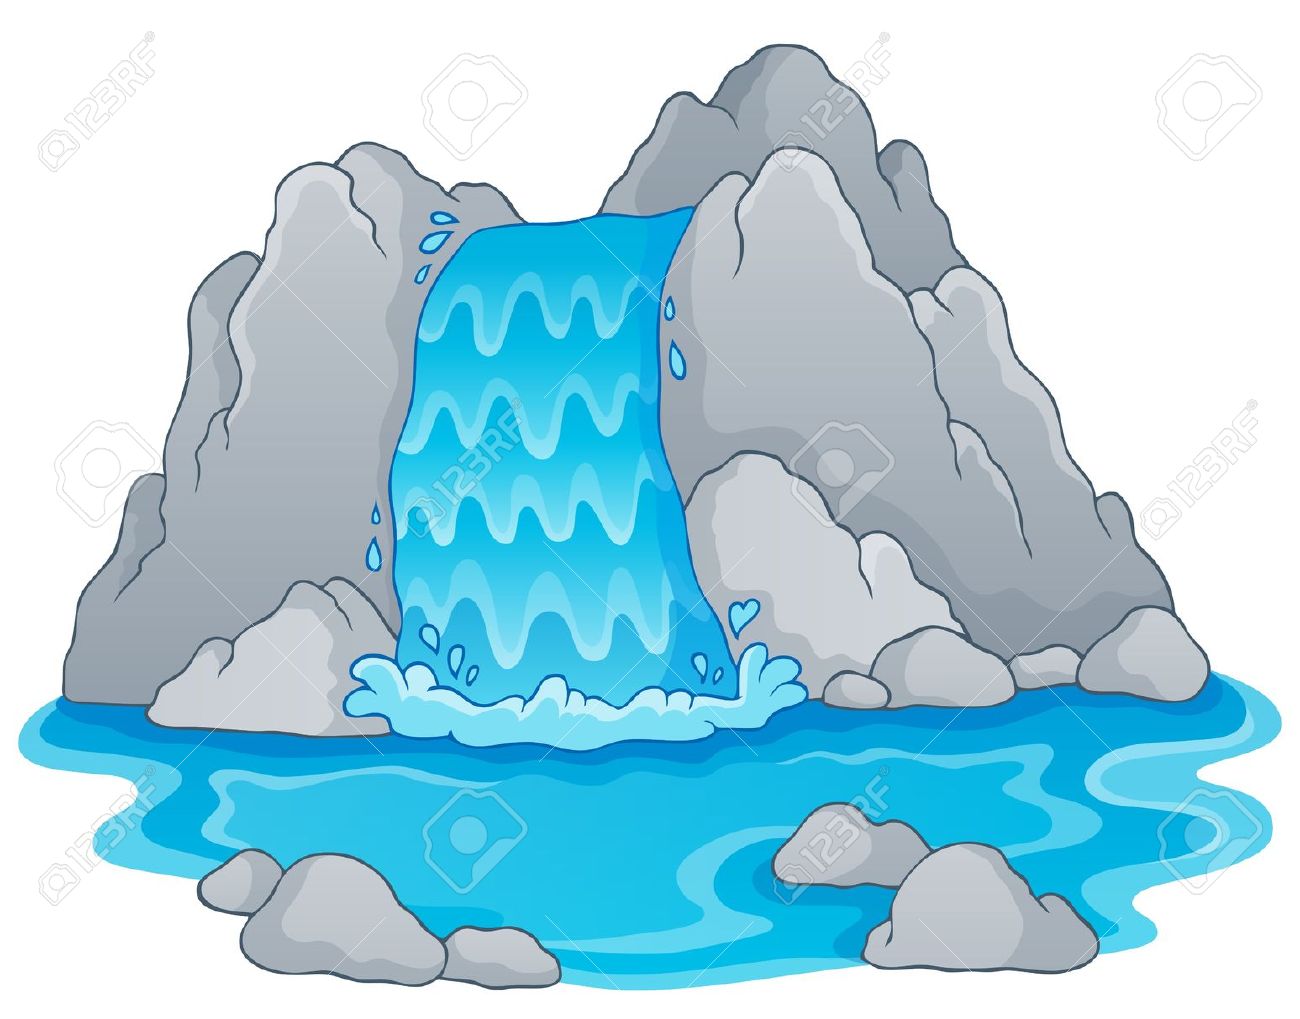 waterfall: Image with . - Waterfall Clipart